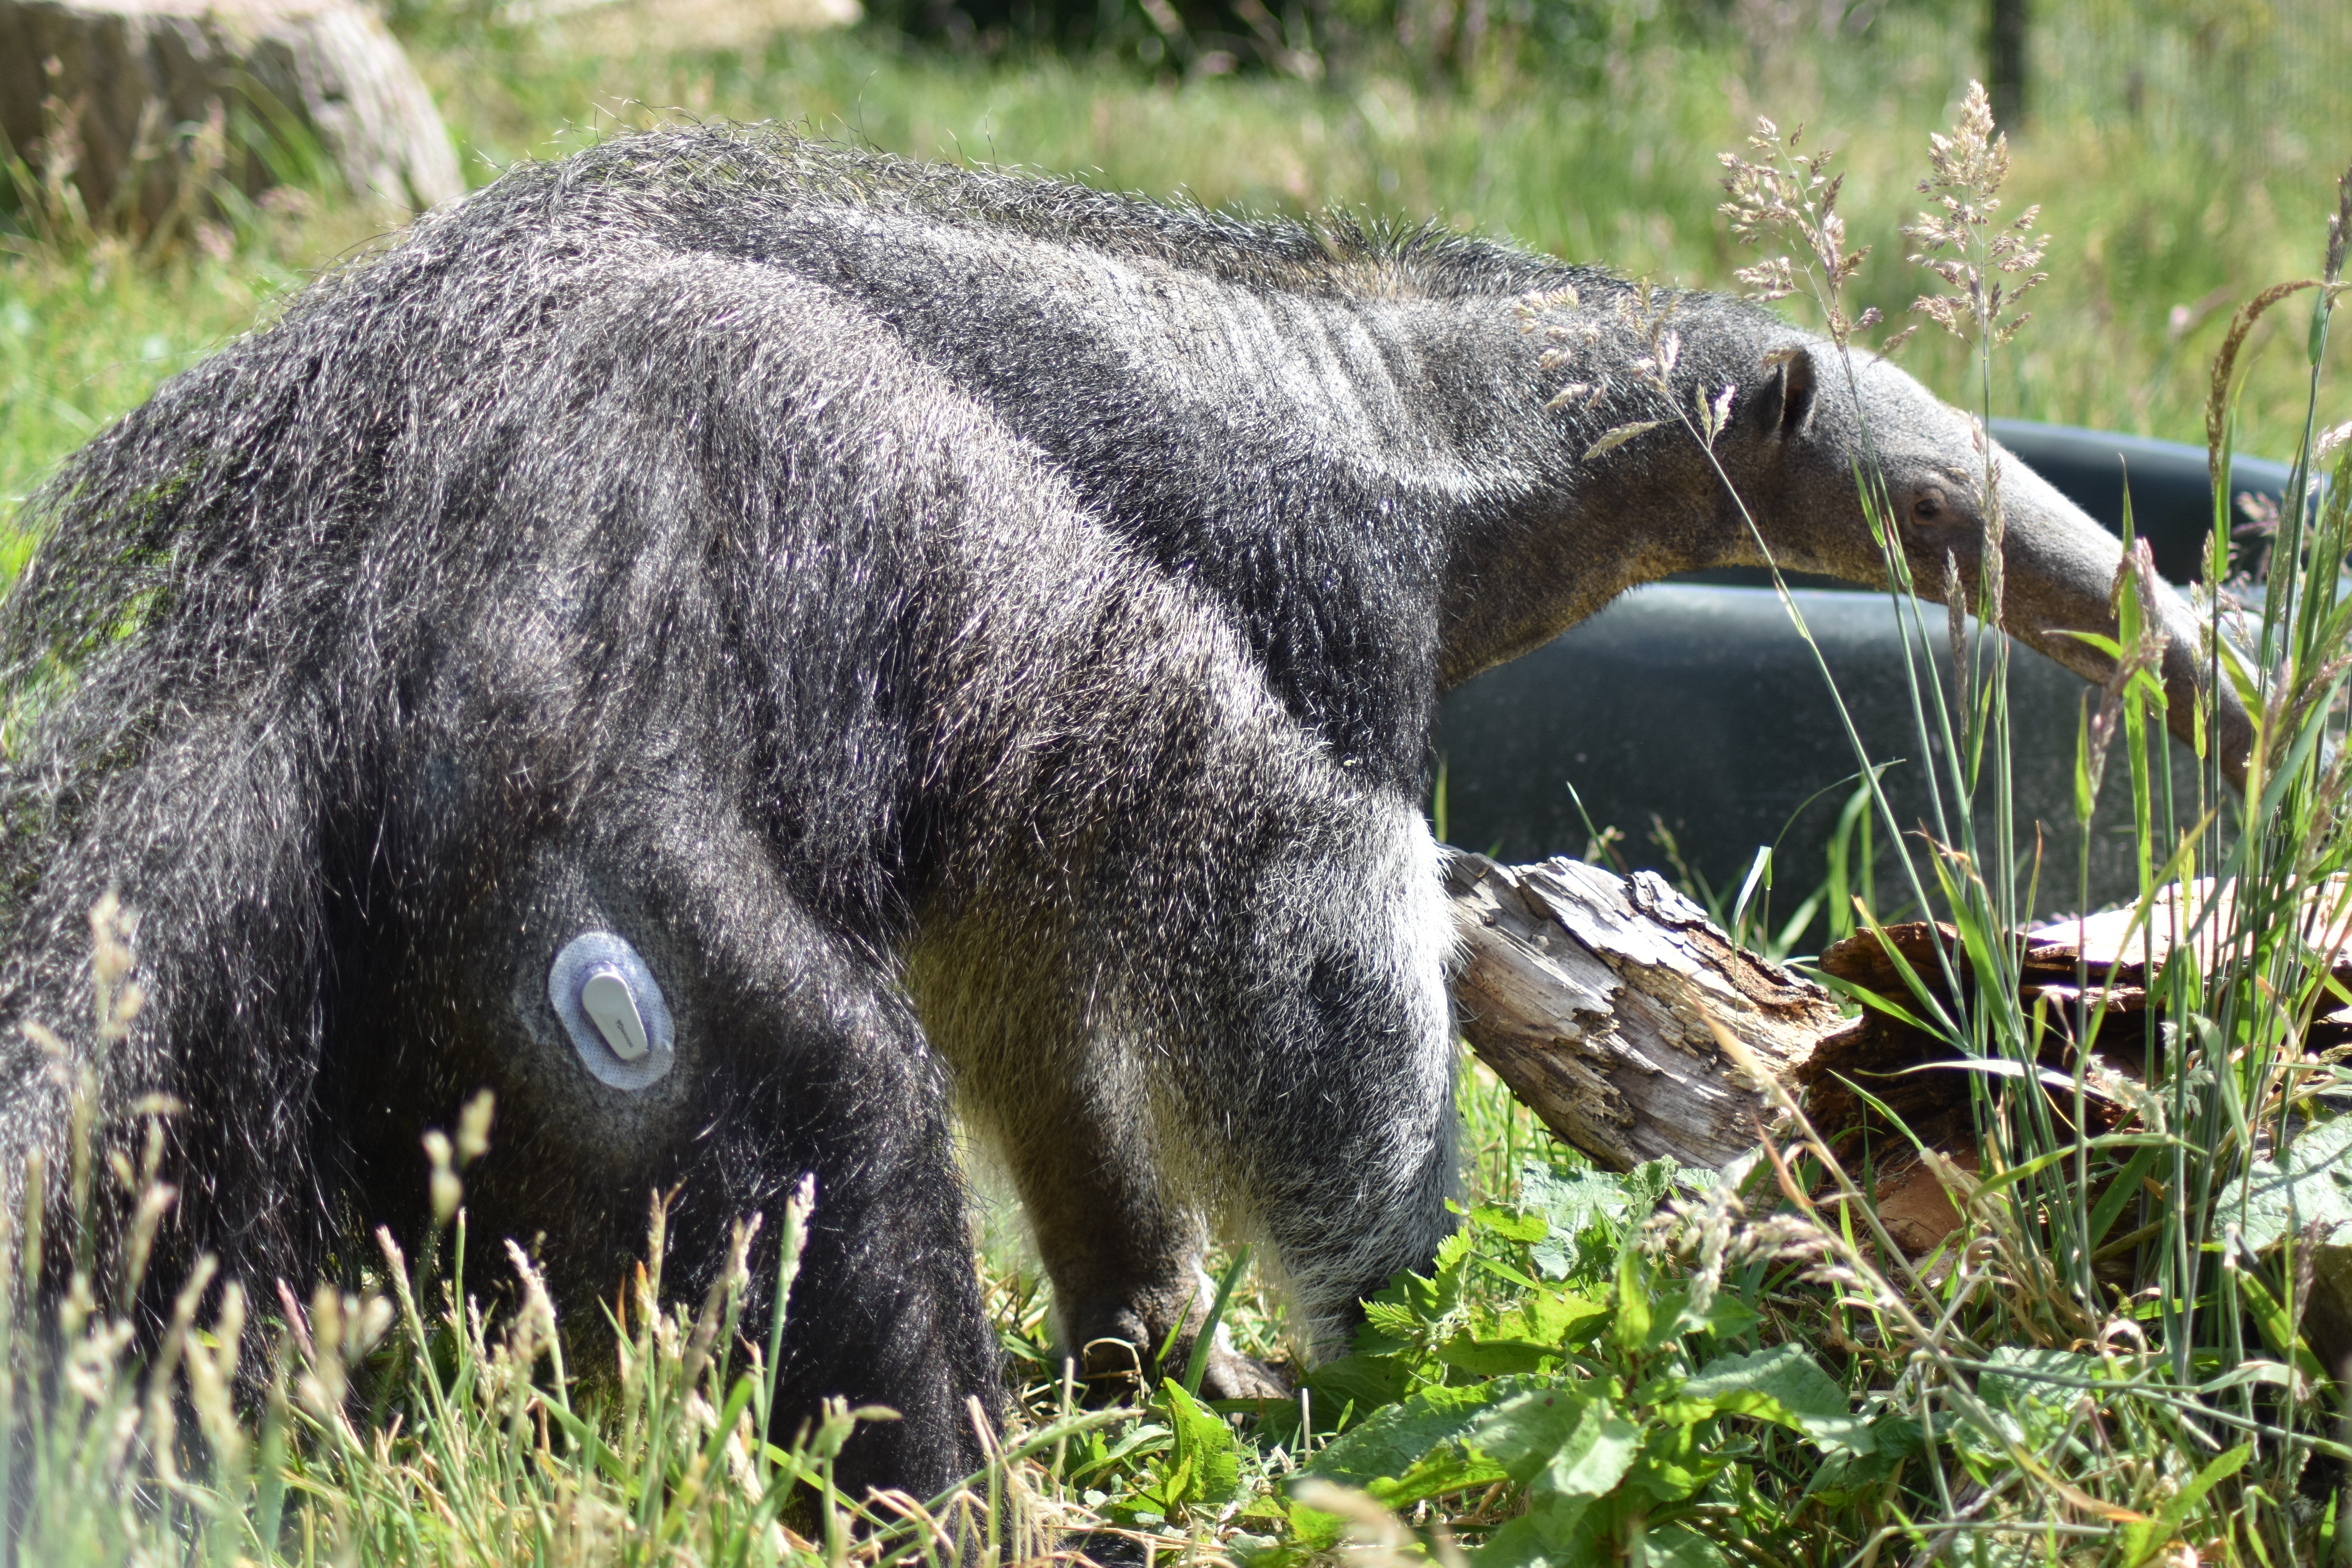 Giant anteater Nala has been diagnosed with type 1 diabetes (RZSS/PA)